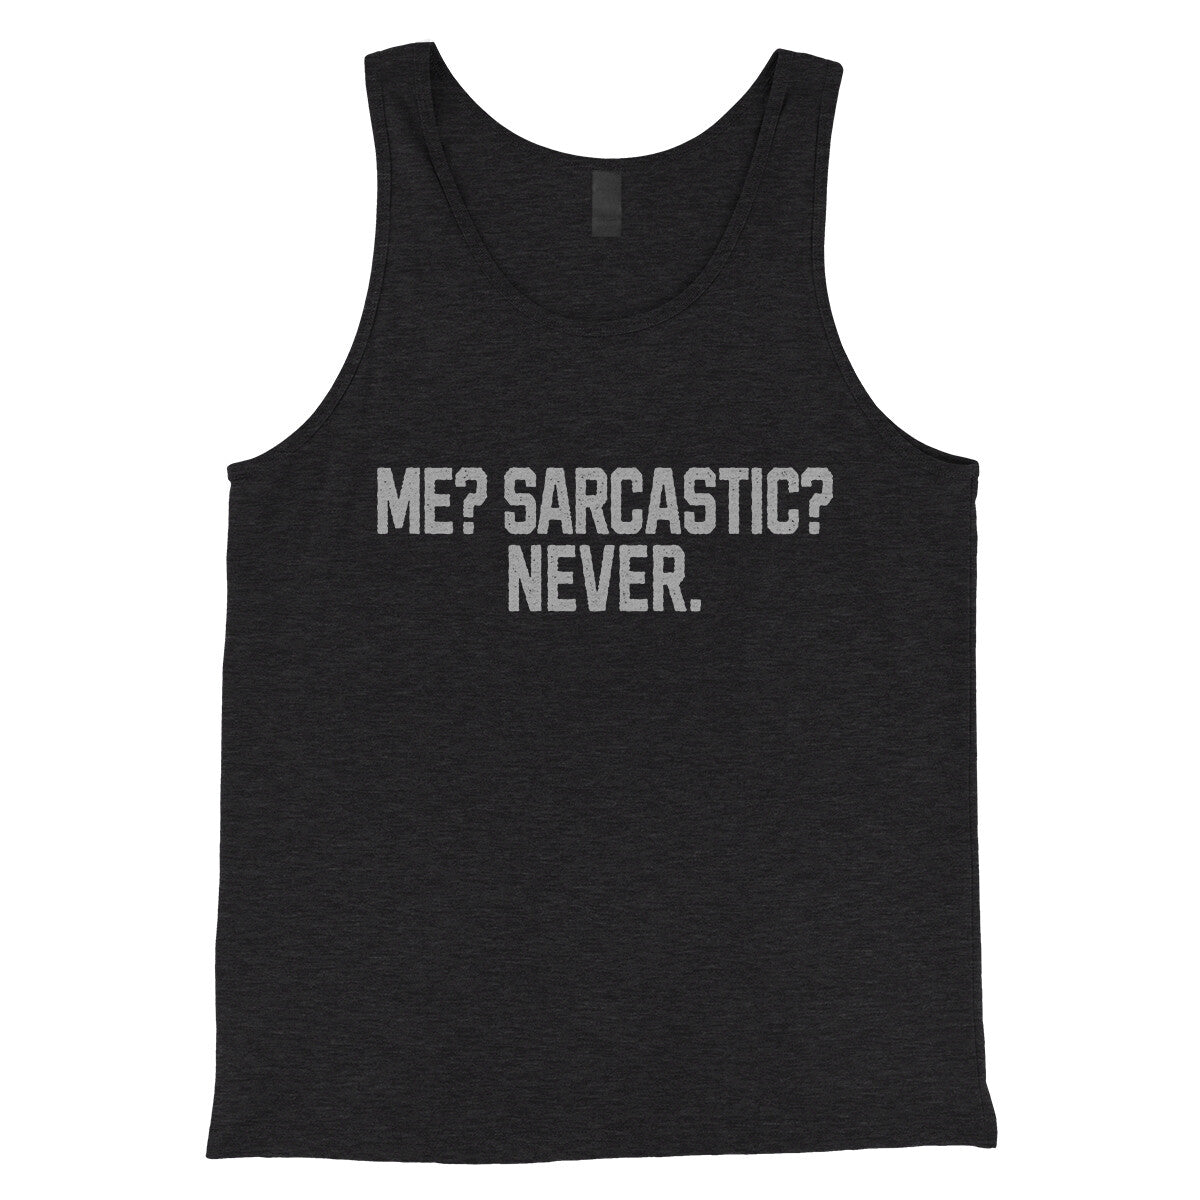 Me Sarcastic Never in Charcoal Black TriBlend Color